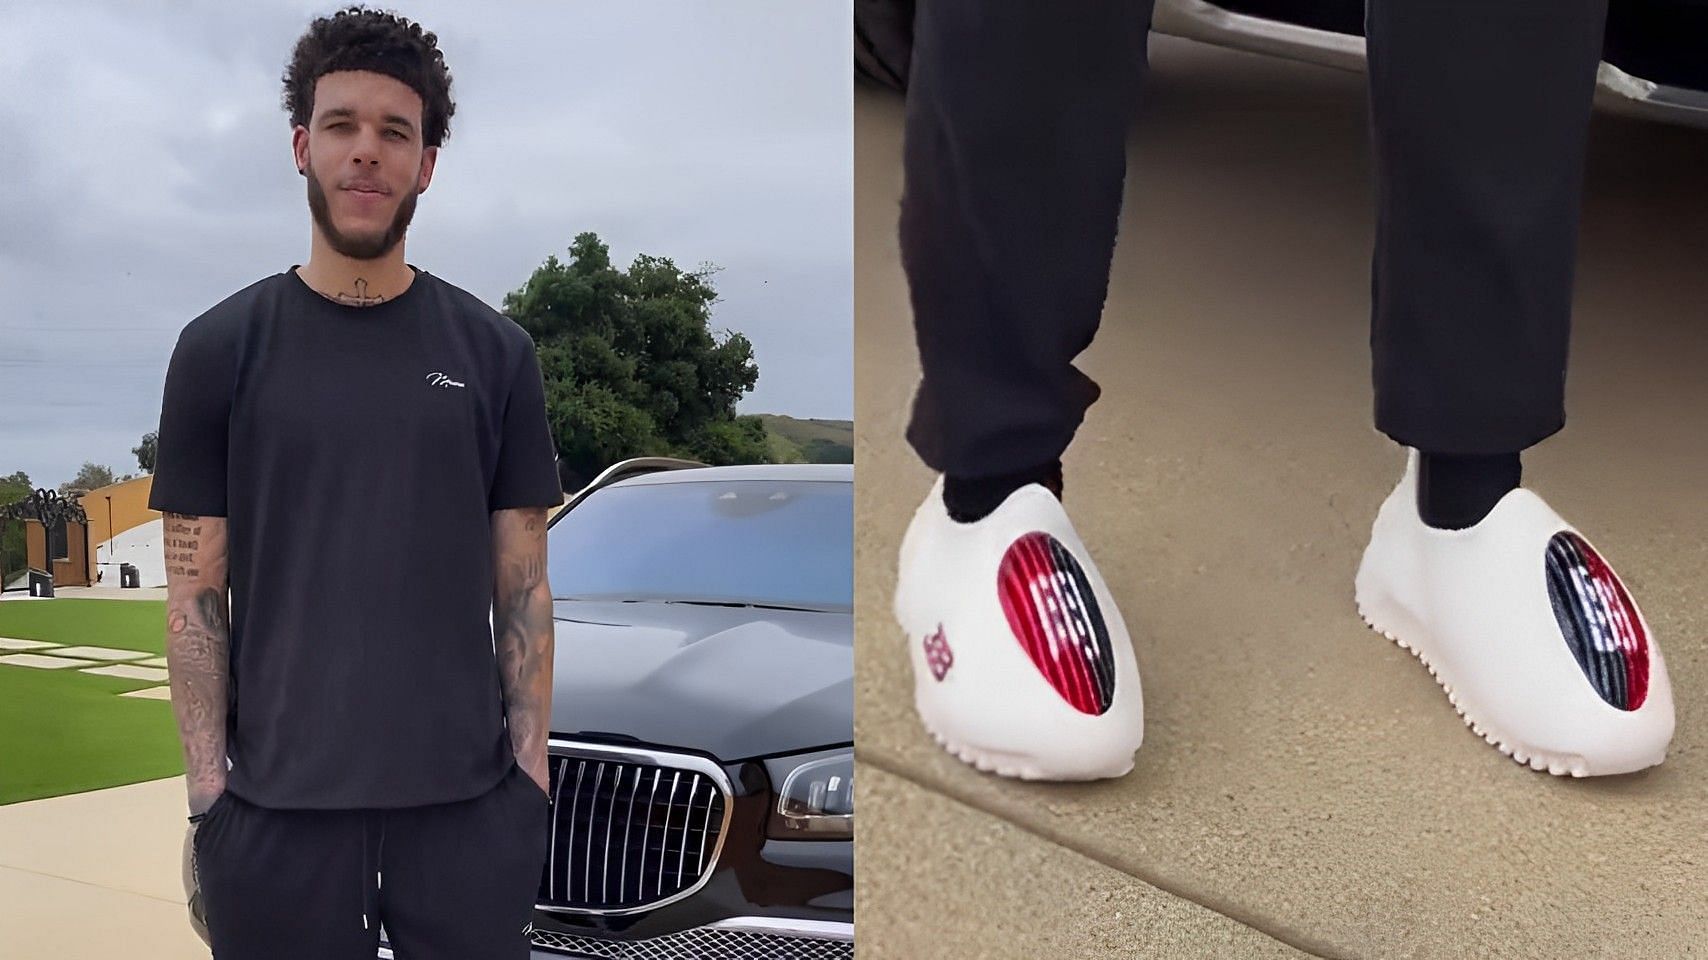 Despite injury rumors linked to Big Baller Brand shoes, Lonzo Ball stands by the billion-dollar brand claimed by his father